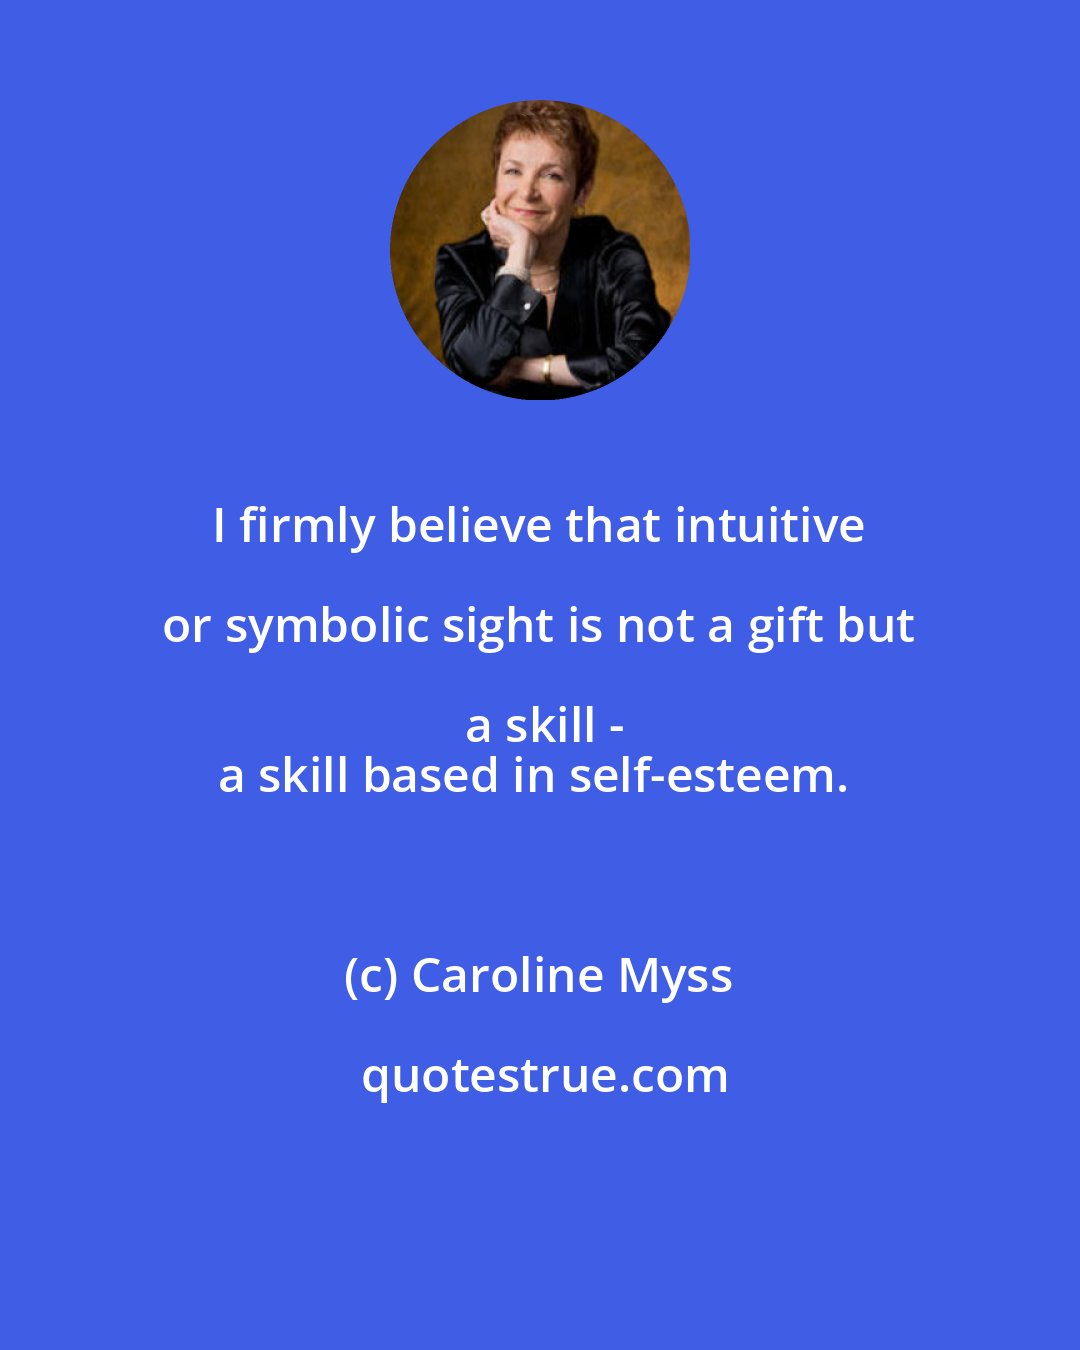 Caroline Myss: I firmly believe that intuitive or symbolic sight is not a gift but a skill -
a skill based in self-esteem.